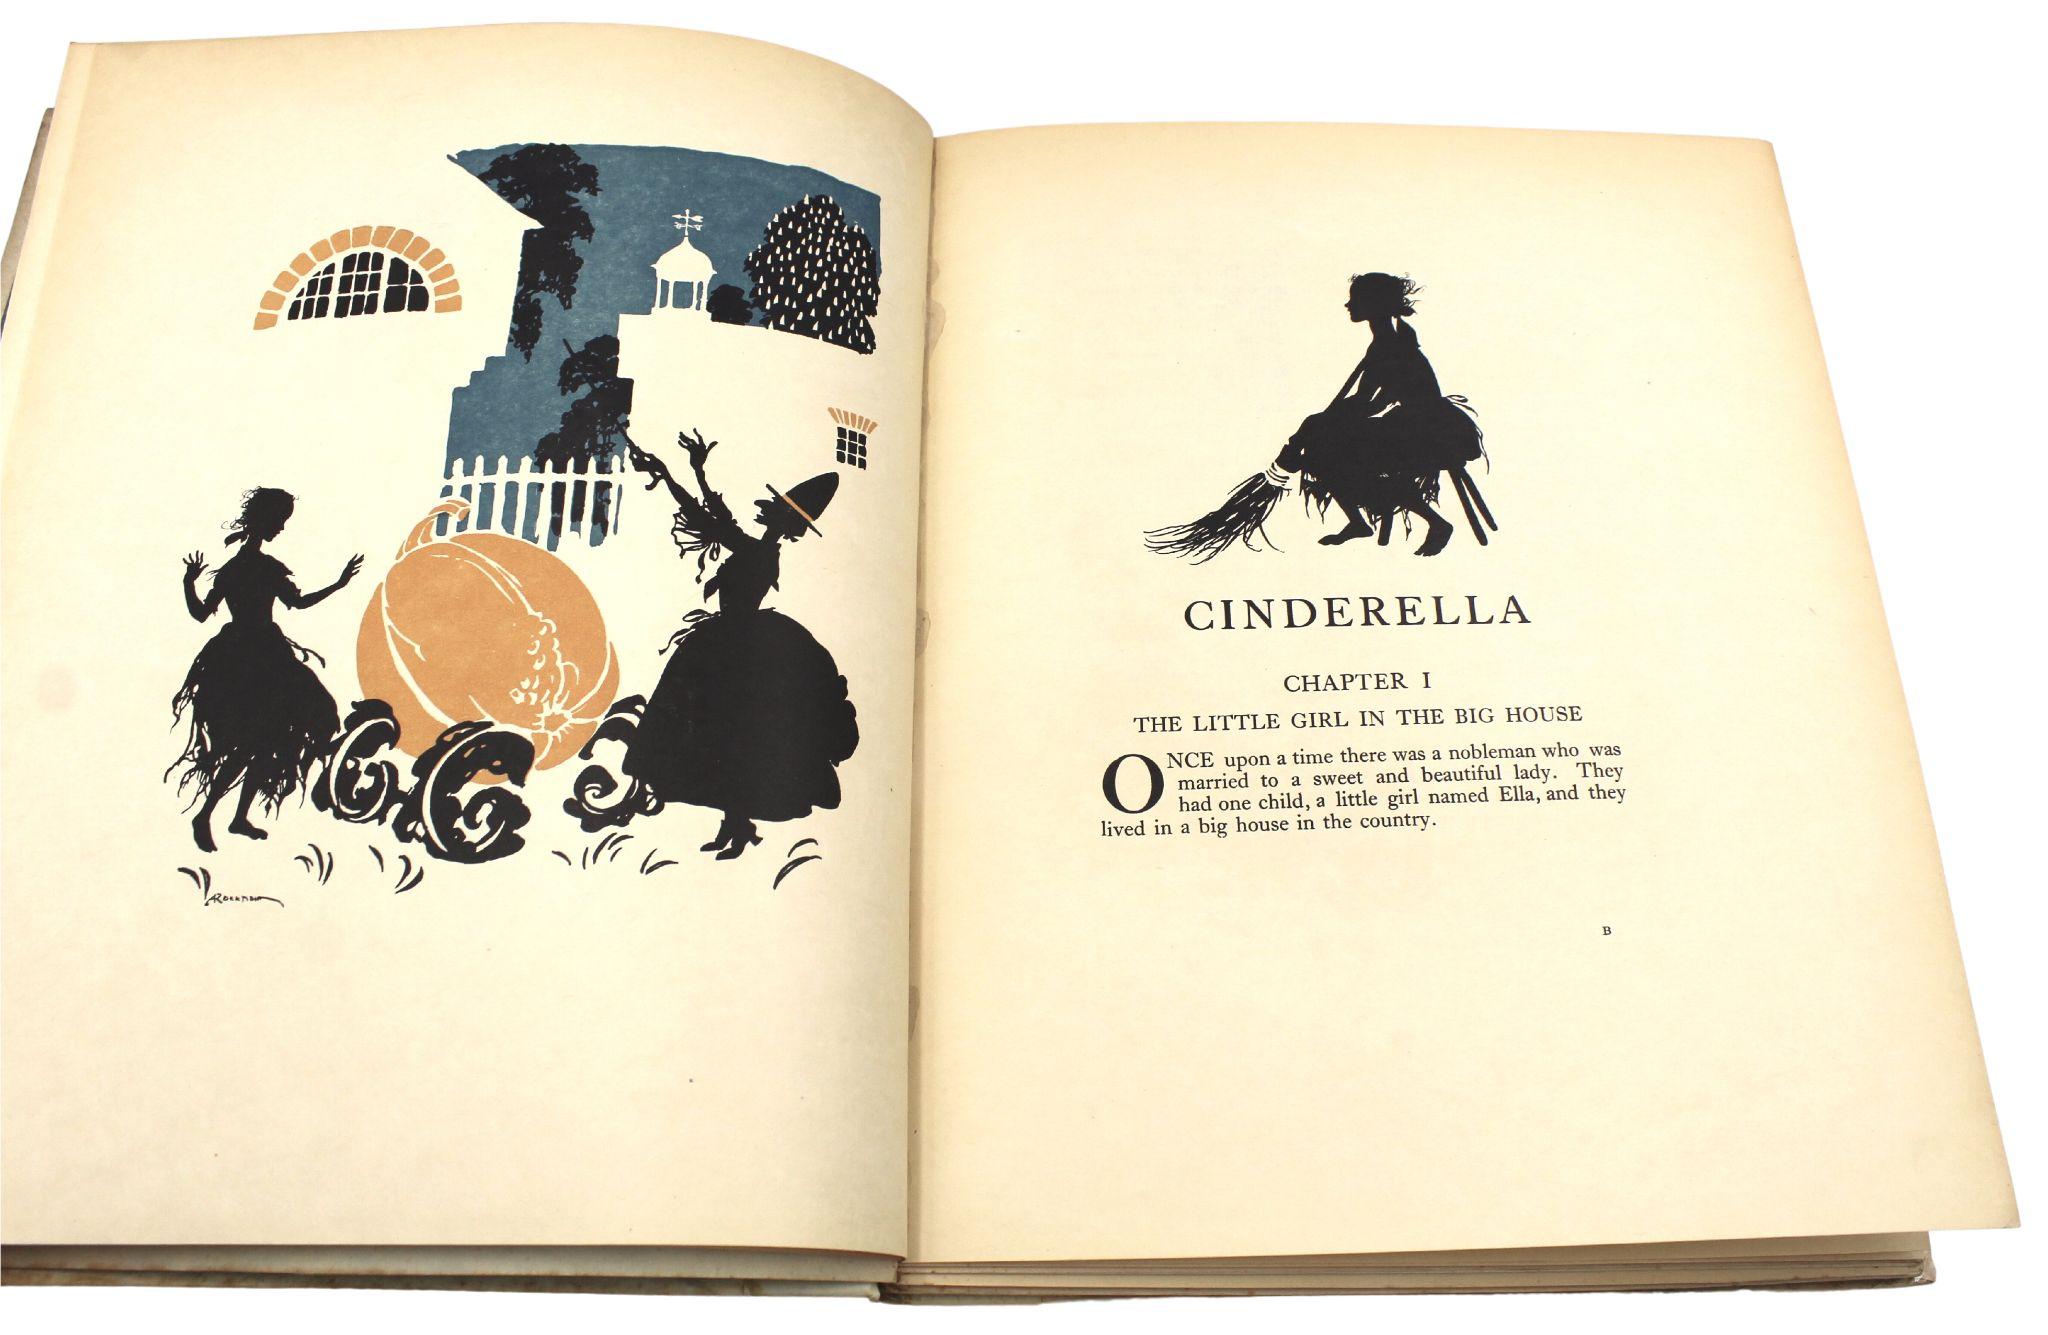 Cinderella, Edited by C.S. Evans, Signed by Arthur Rackham, Edition de Lux, 1919 In Good Condition For Sale In Colorado Springs, CO